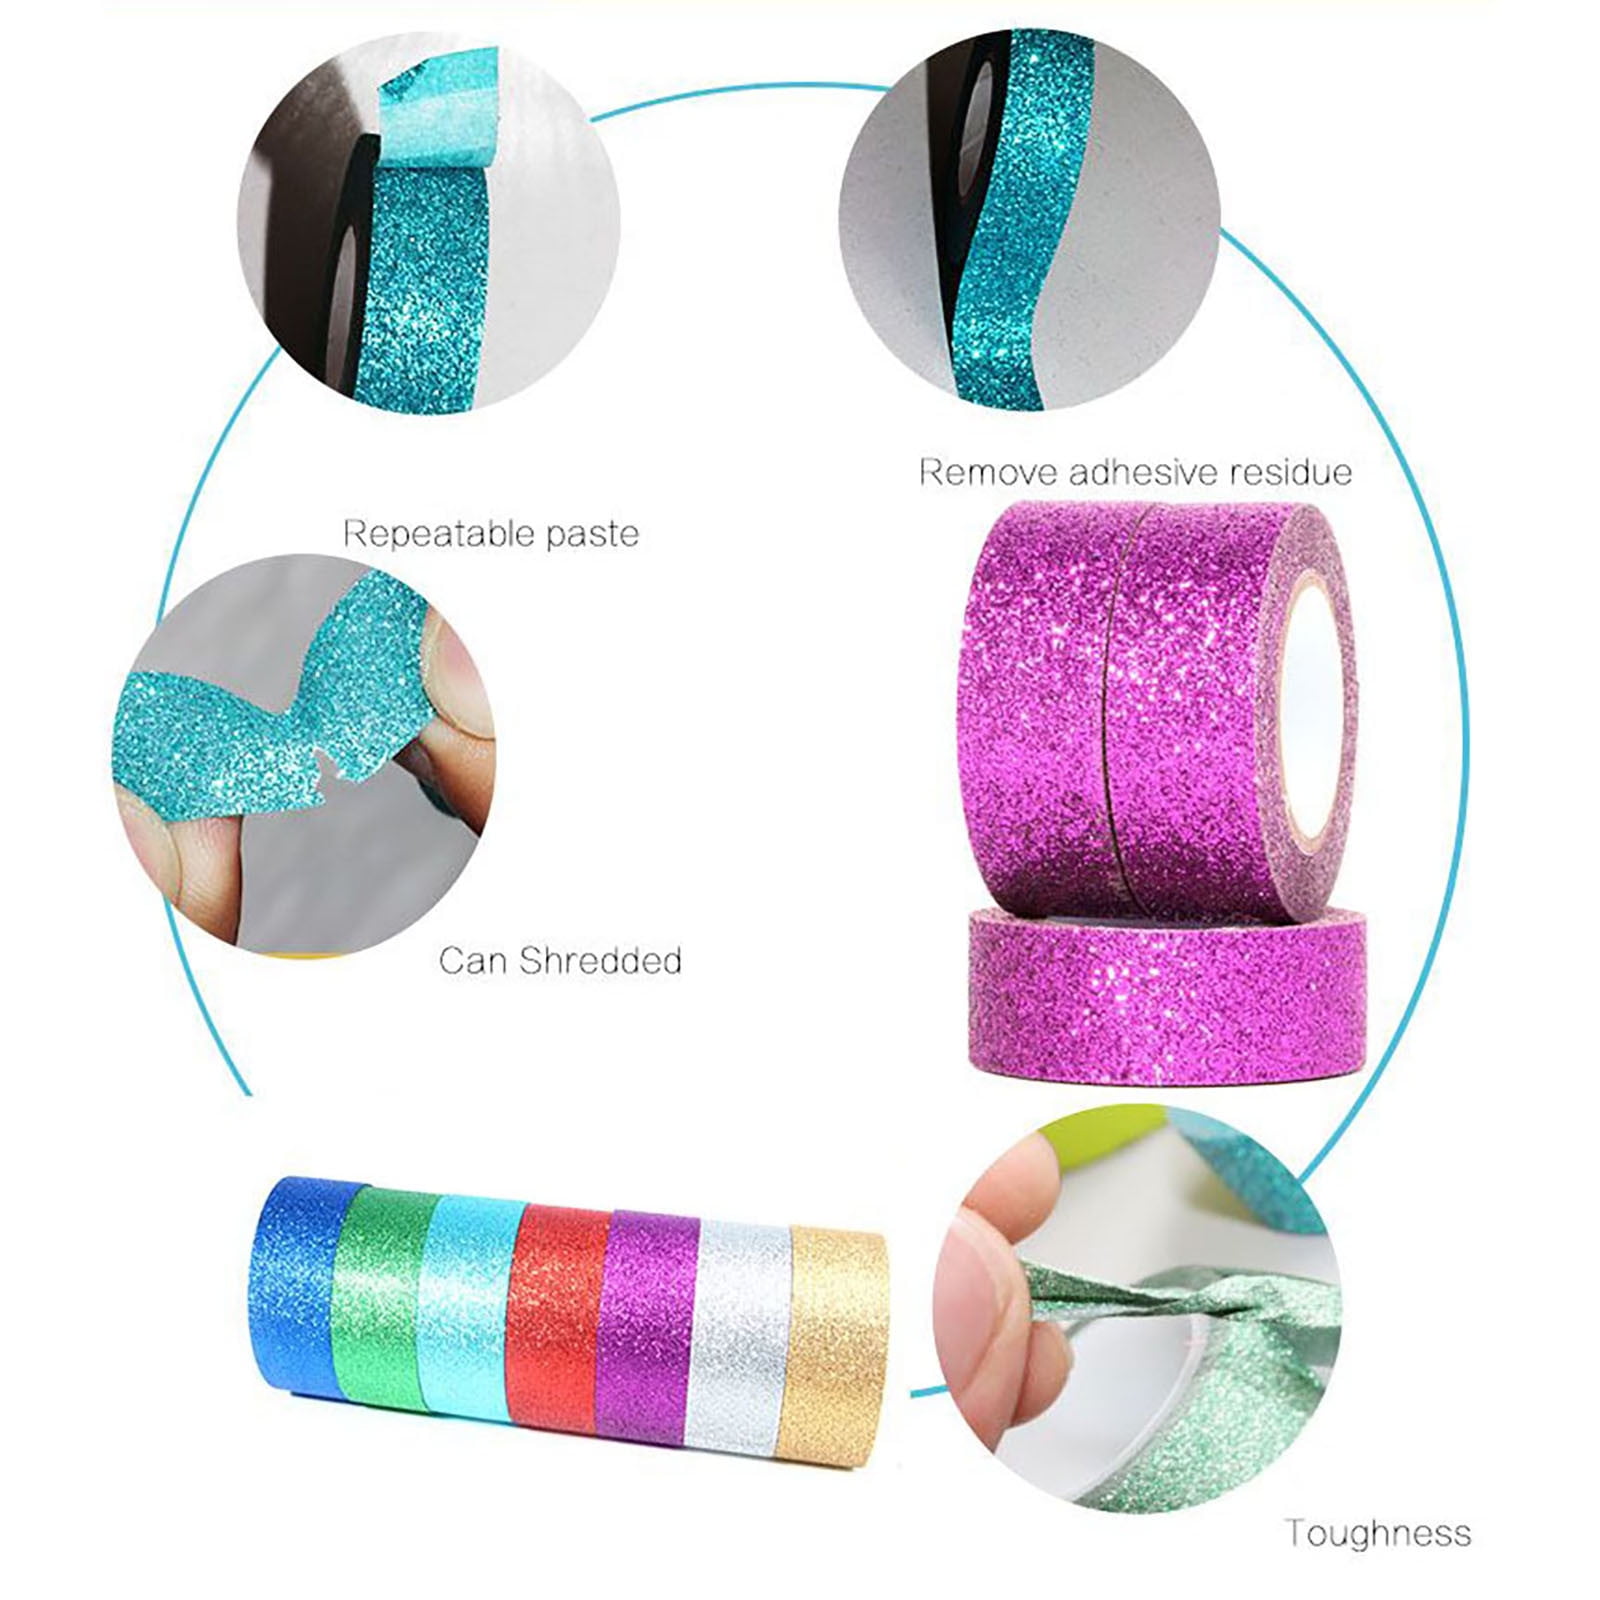 Ploknplq Painters Tape Masking Tape Decorative Tape Craft Self Adhesive  Stickers Adhesive Glitter Decoration for Diy Crafts Gift Packaging